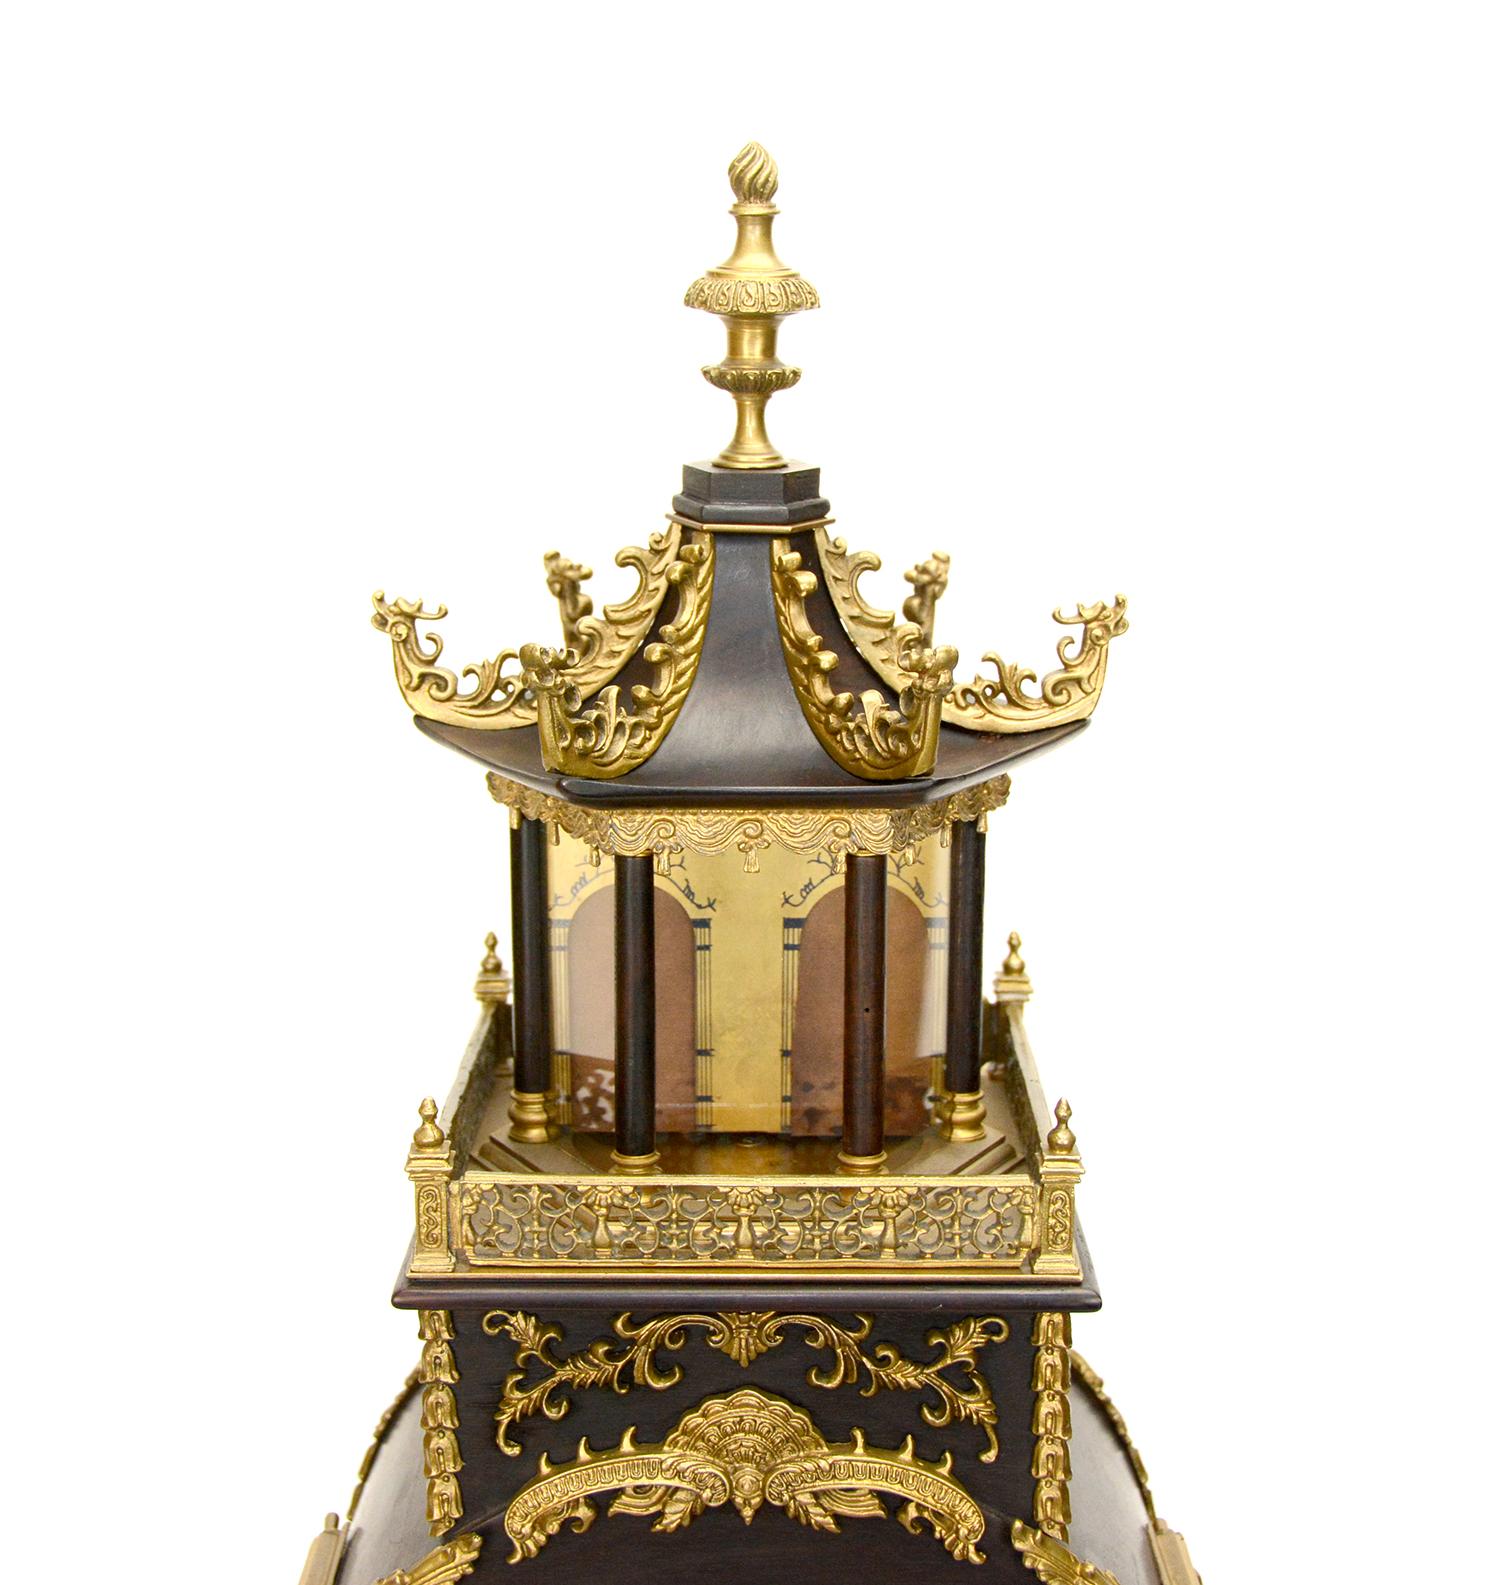 Fine Canton Workshop Chinese Automaton Acrobatic Figure Musical Pagoda Bracket Clock

Here for your consideration is a large Chinese Canton bracket clock. The gorgeous hardwood case is decorated with beautiful brass casting applications. There is